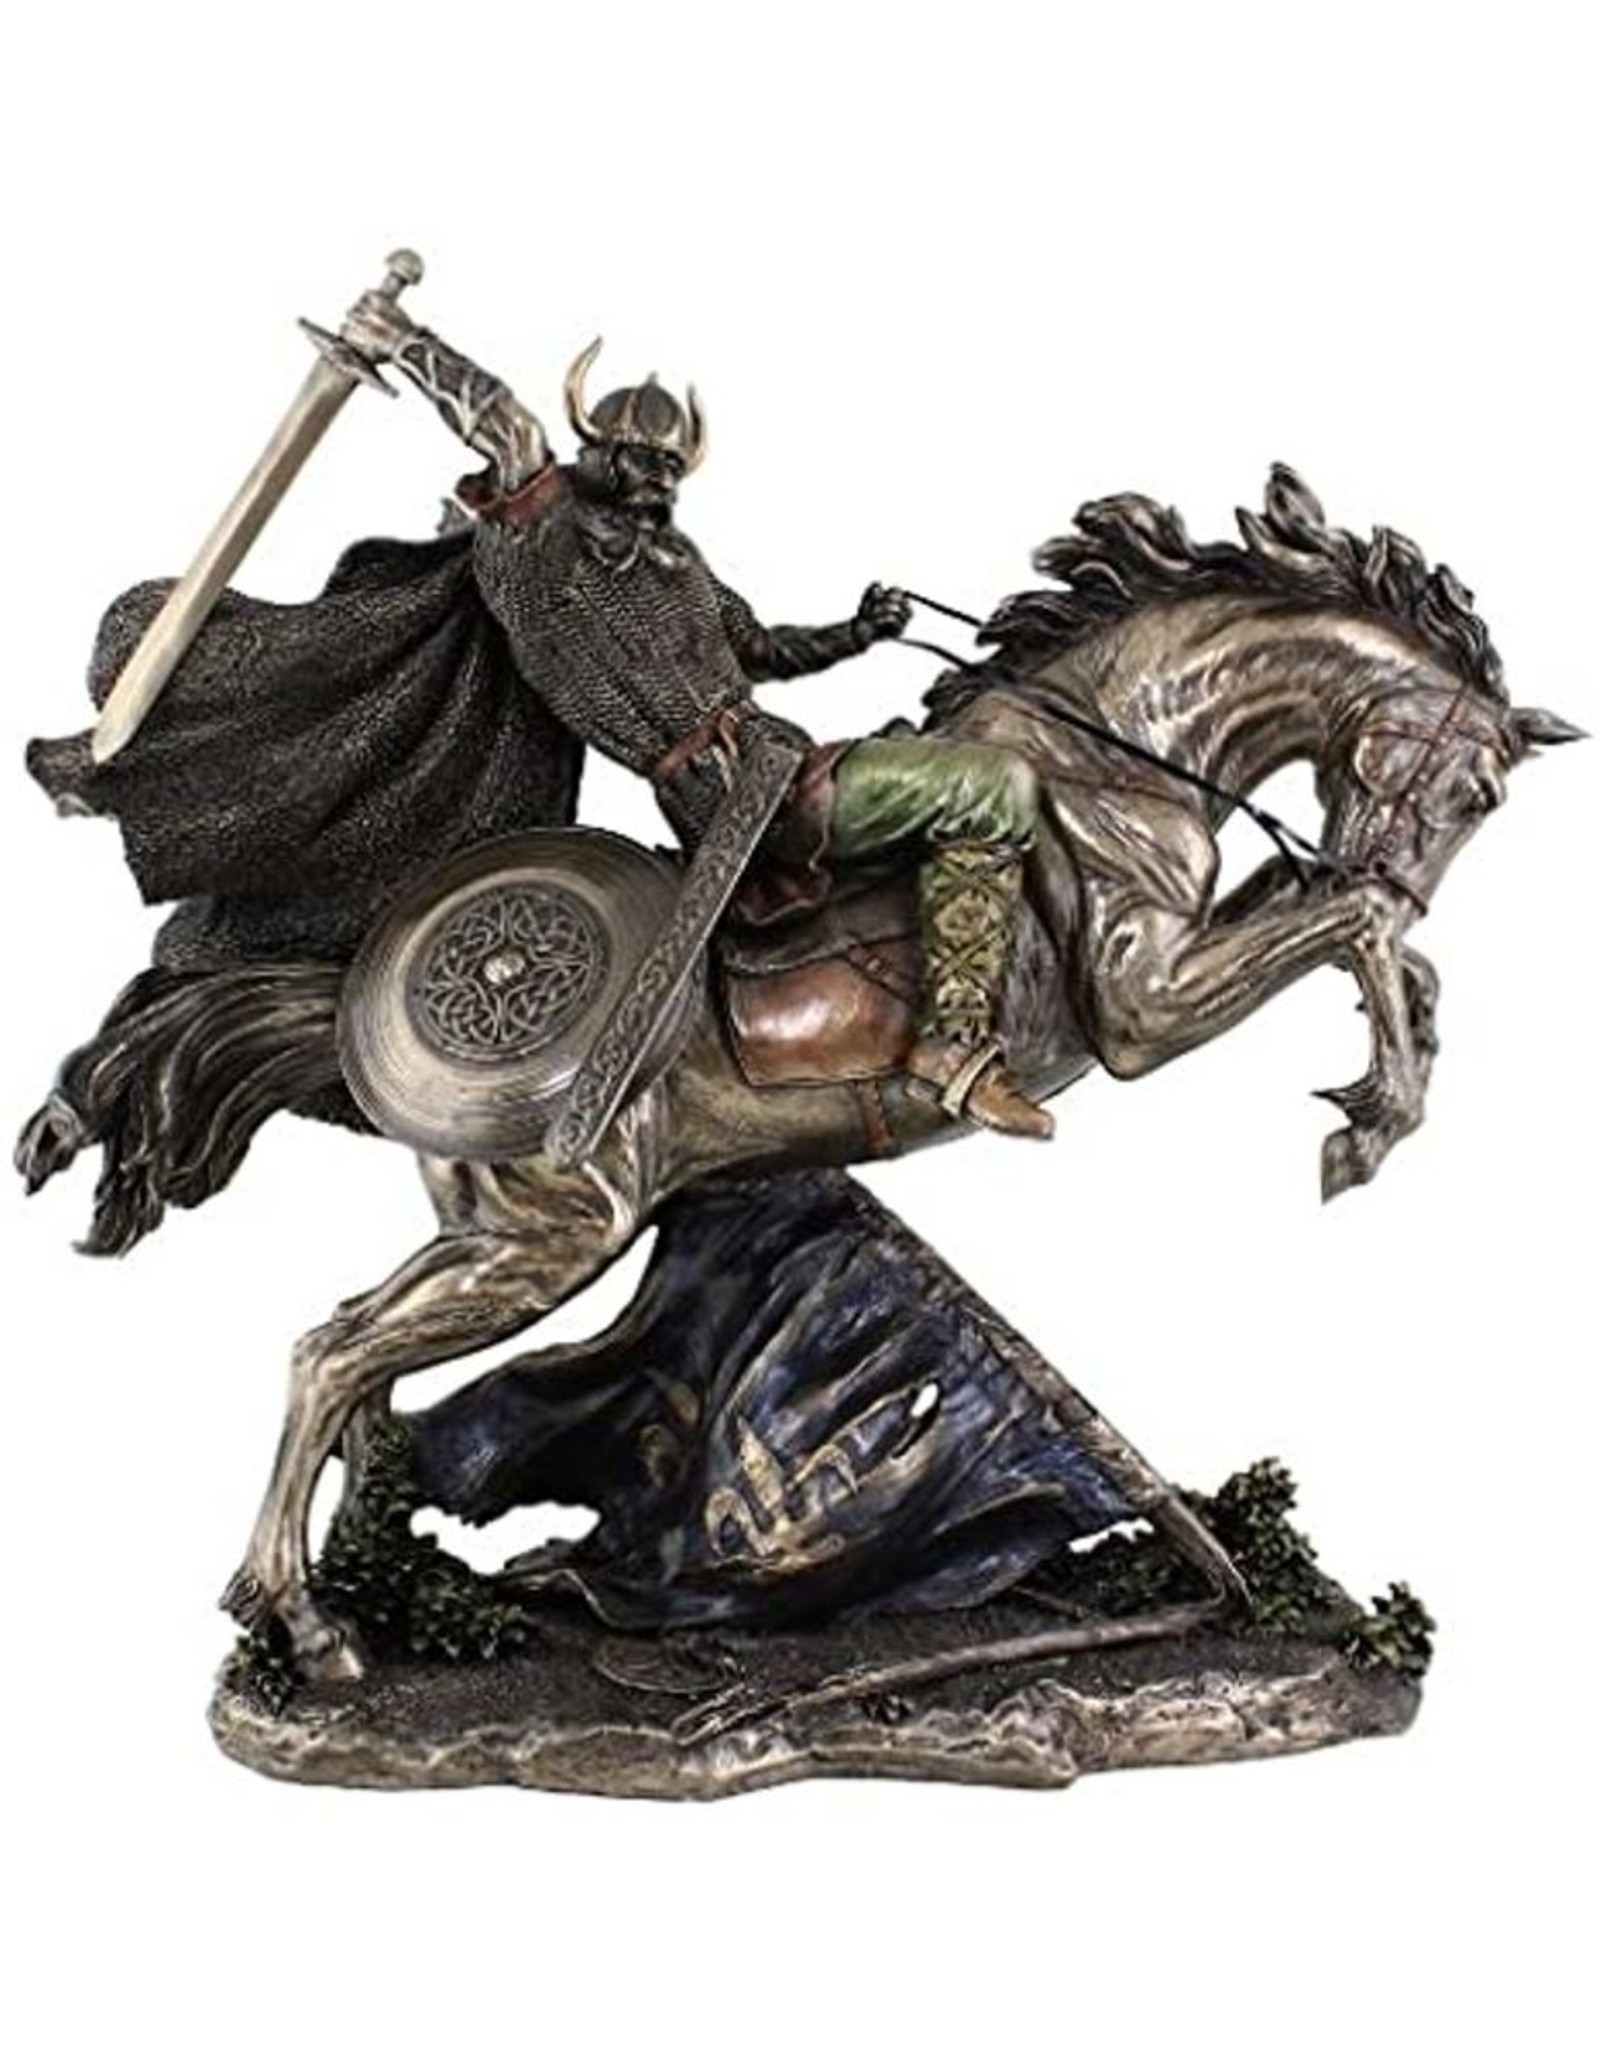 Veronese Design Giftware & Lifestyle - Viking with Sword on a Rearing Horse bronzed